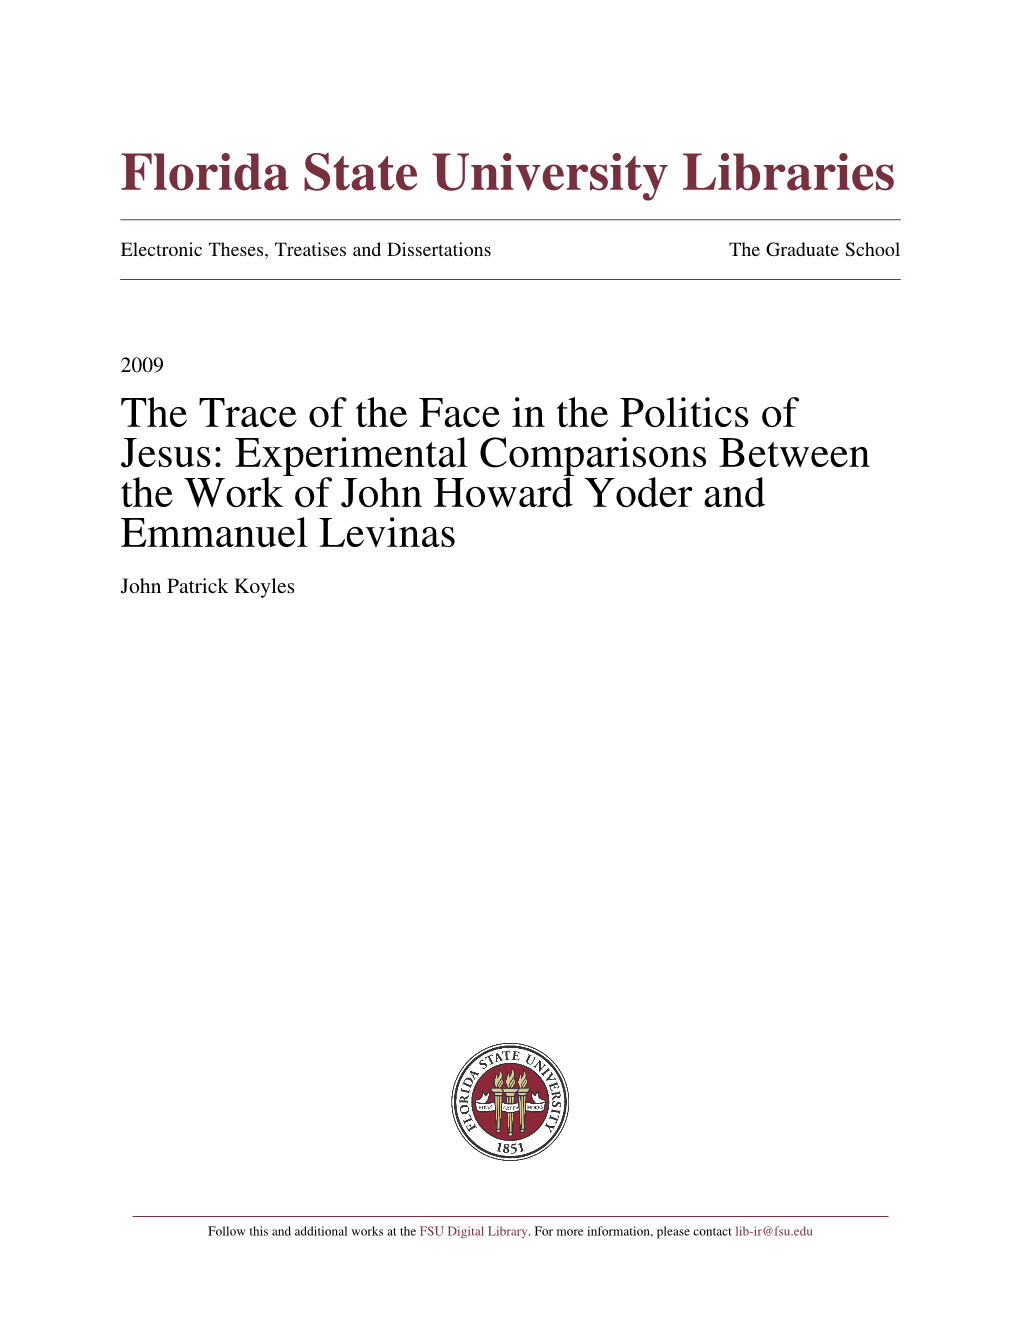 The Trace of the Face in the Politics of Jesus: Experimental Comparisons Between the Work of John Howard Yoder and Emmanuel Levinas John Patrick Koyles